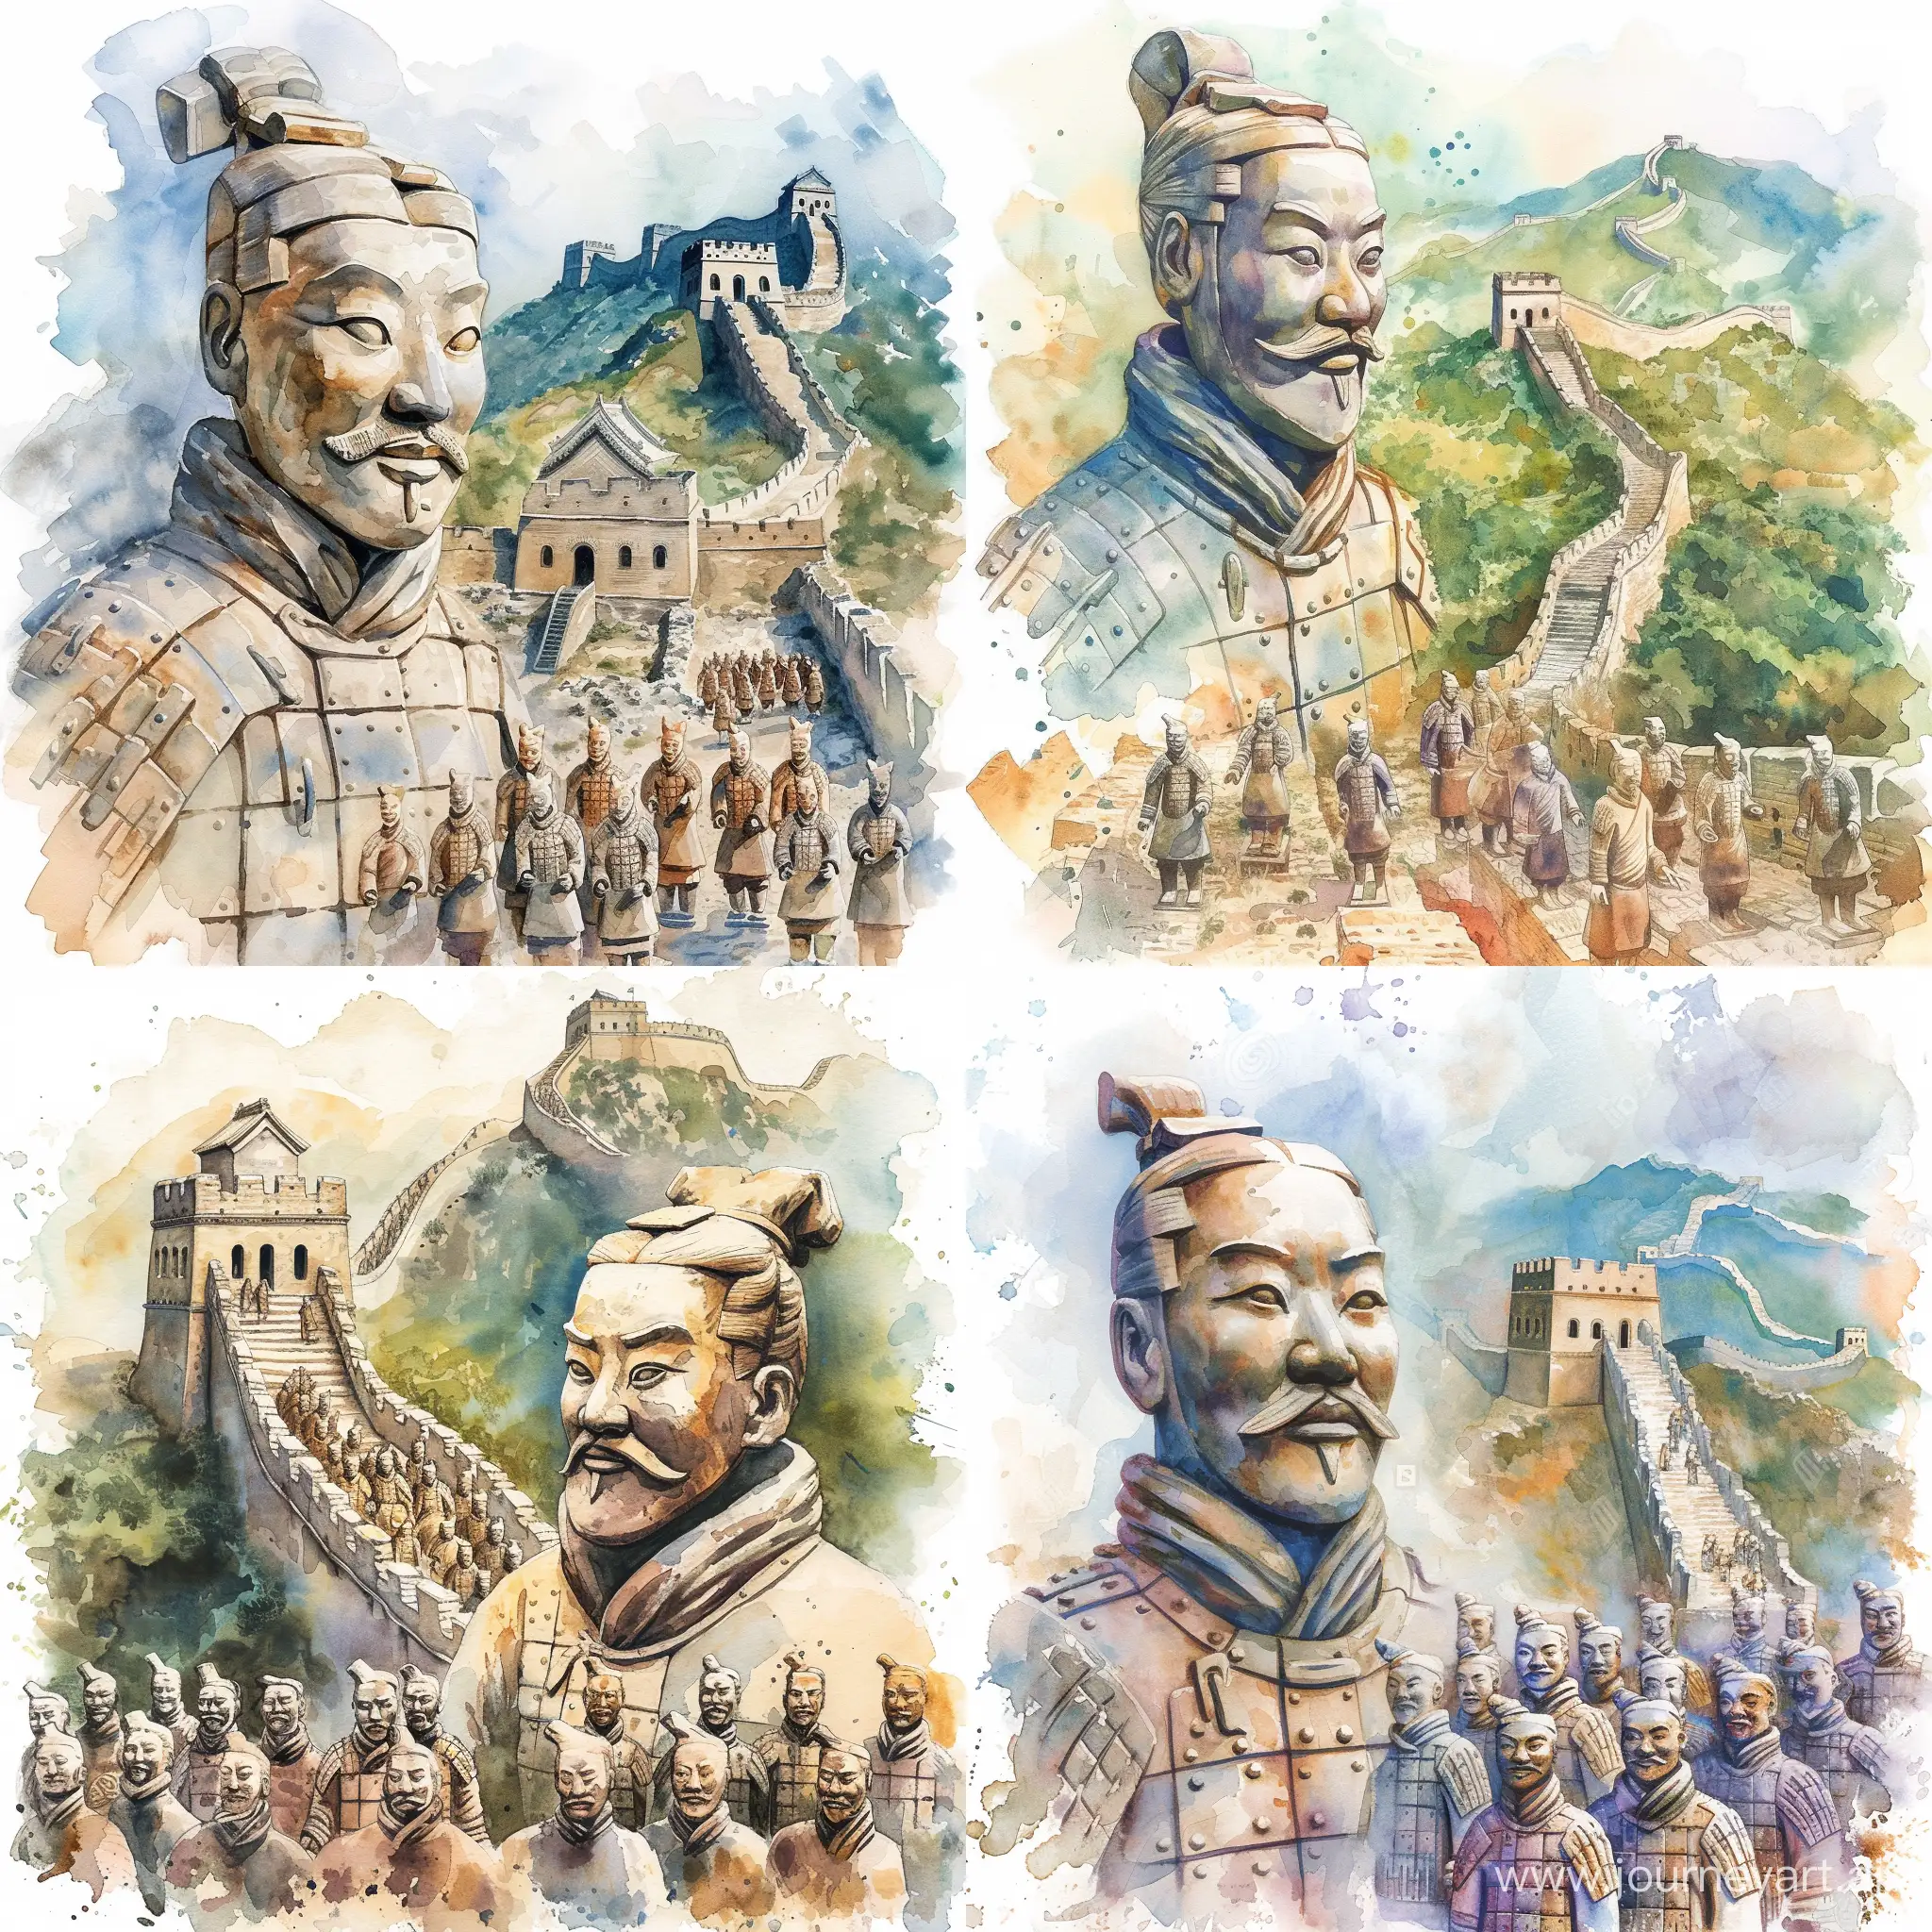 Majestic-Watercolor-Tribute-to-Qin-Shi-Huangs-Terracotta-Army-and-the-Great-Wall-of-China